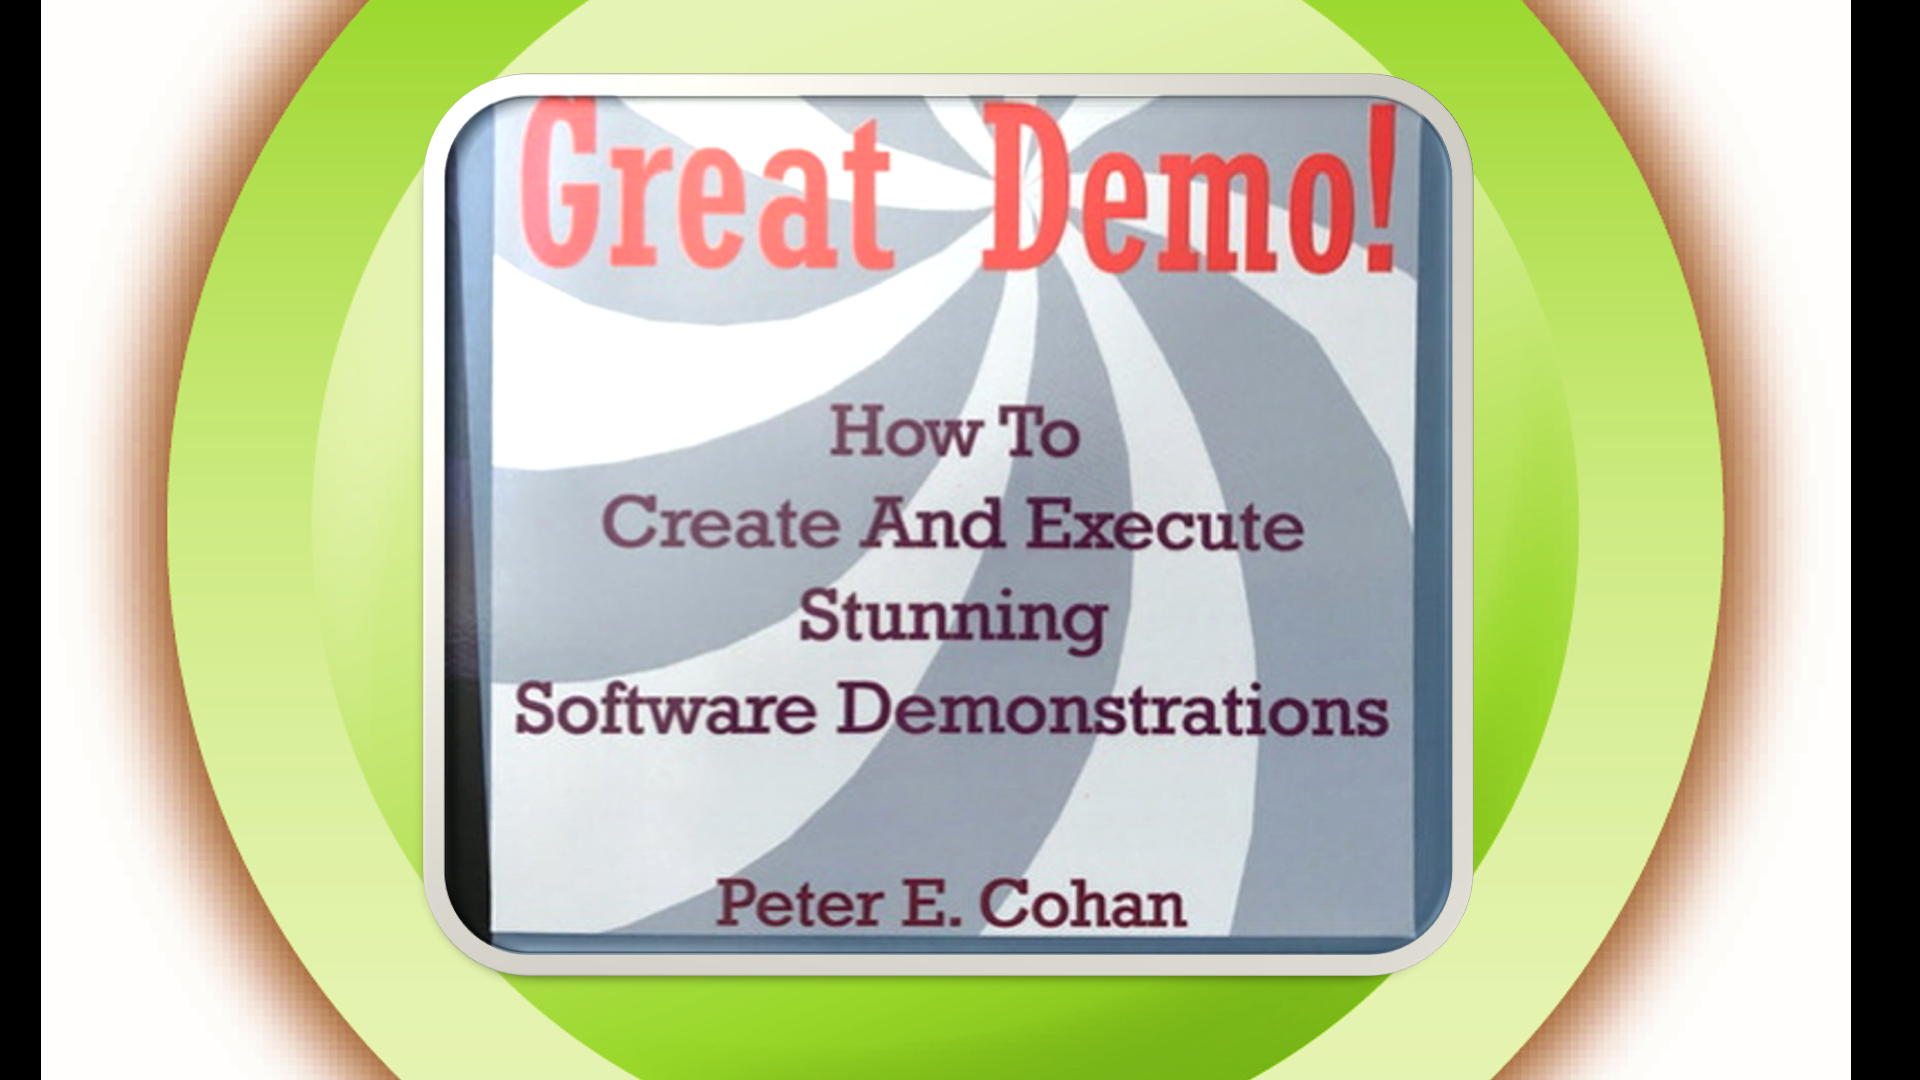 Great Demo! Open Enrollment Workshop - Chesterbrook, PA January 27-28, 2020